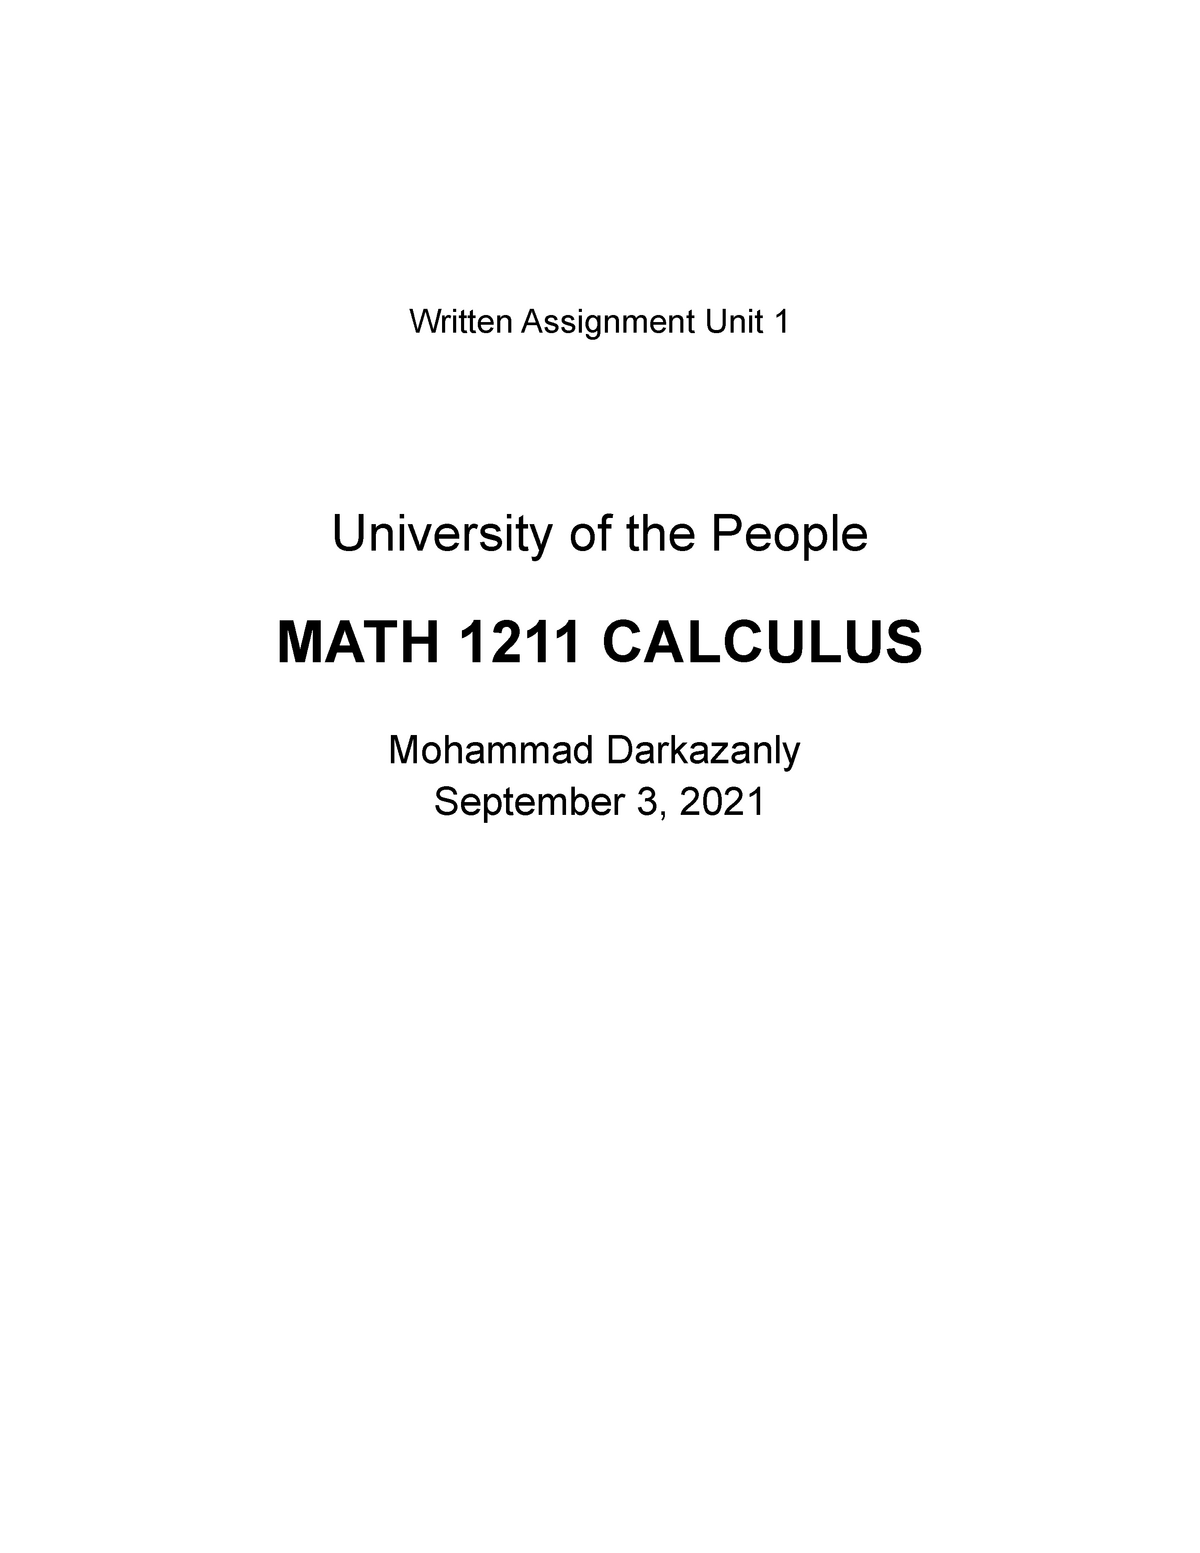 Solved MA 113 CALCULUS I, FALL 2020 WRITTEN ASSIGNMINT #9